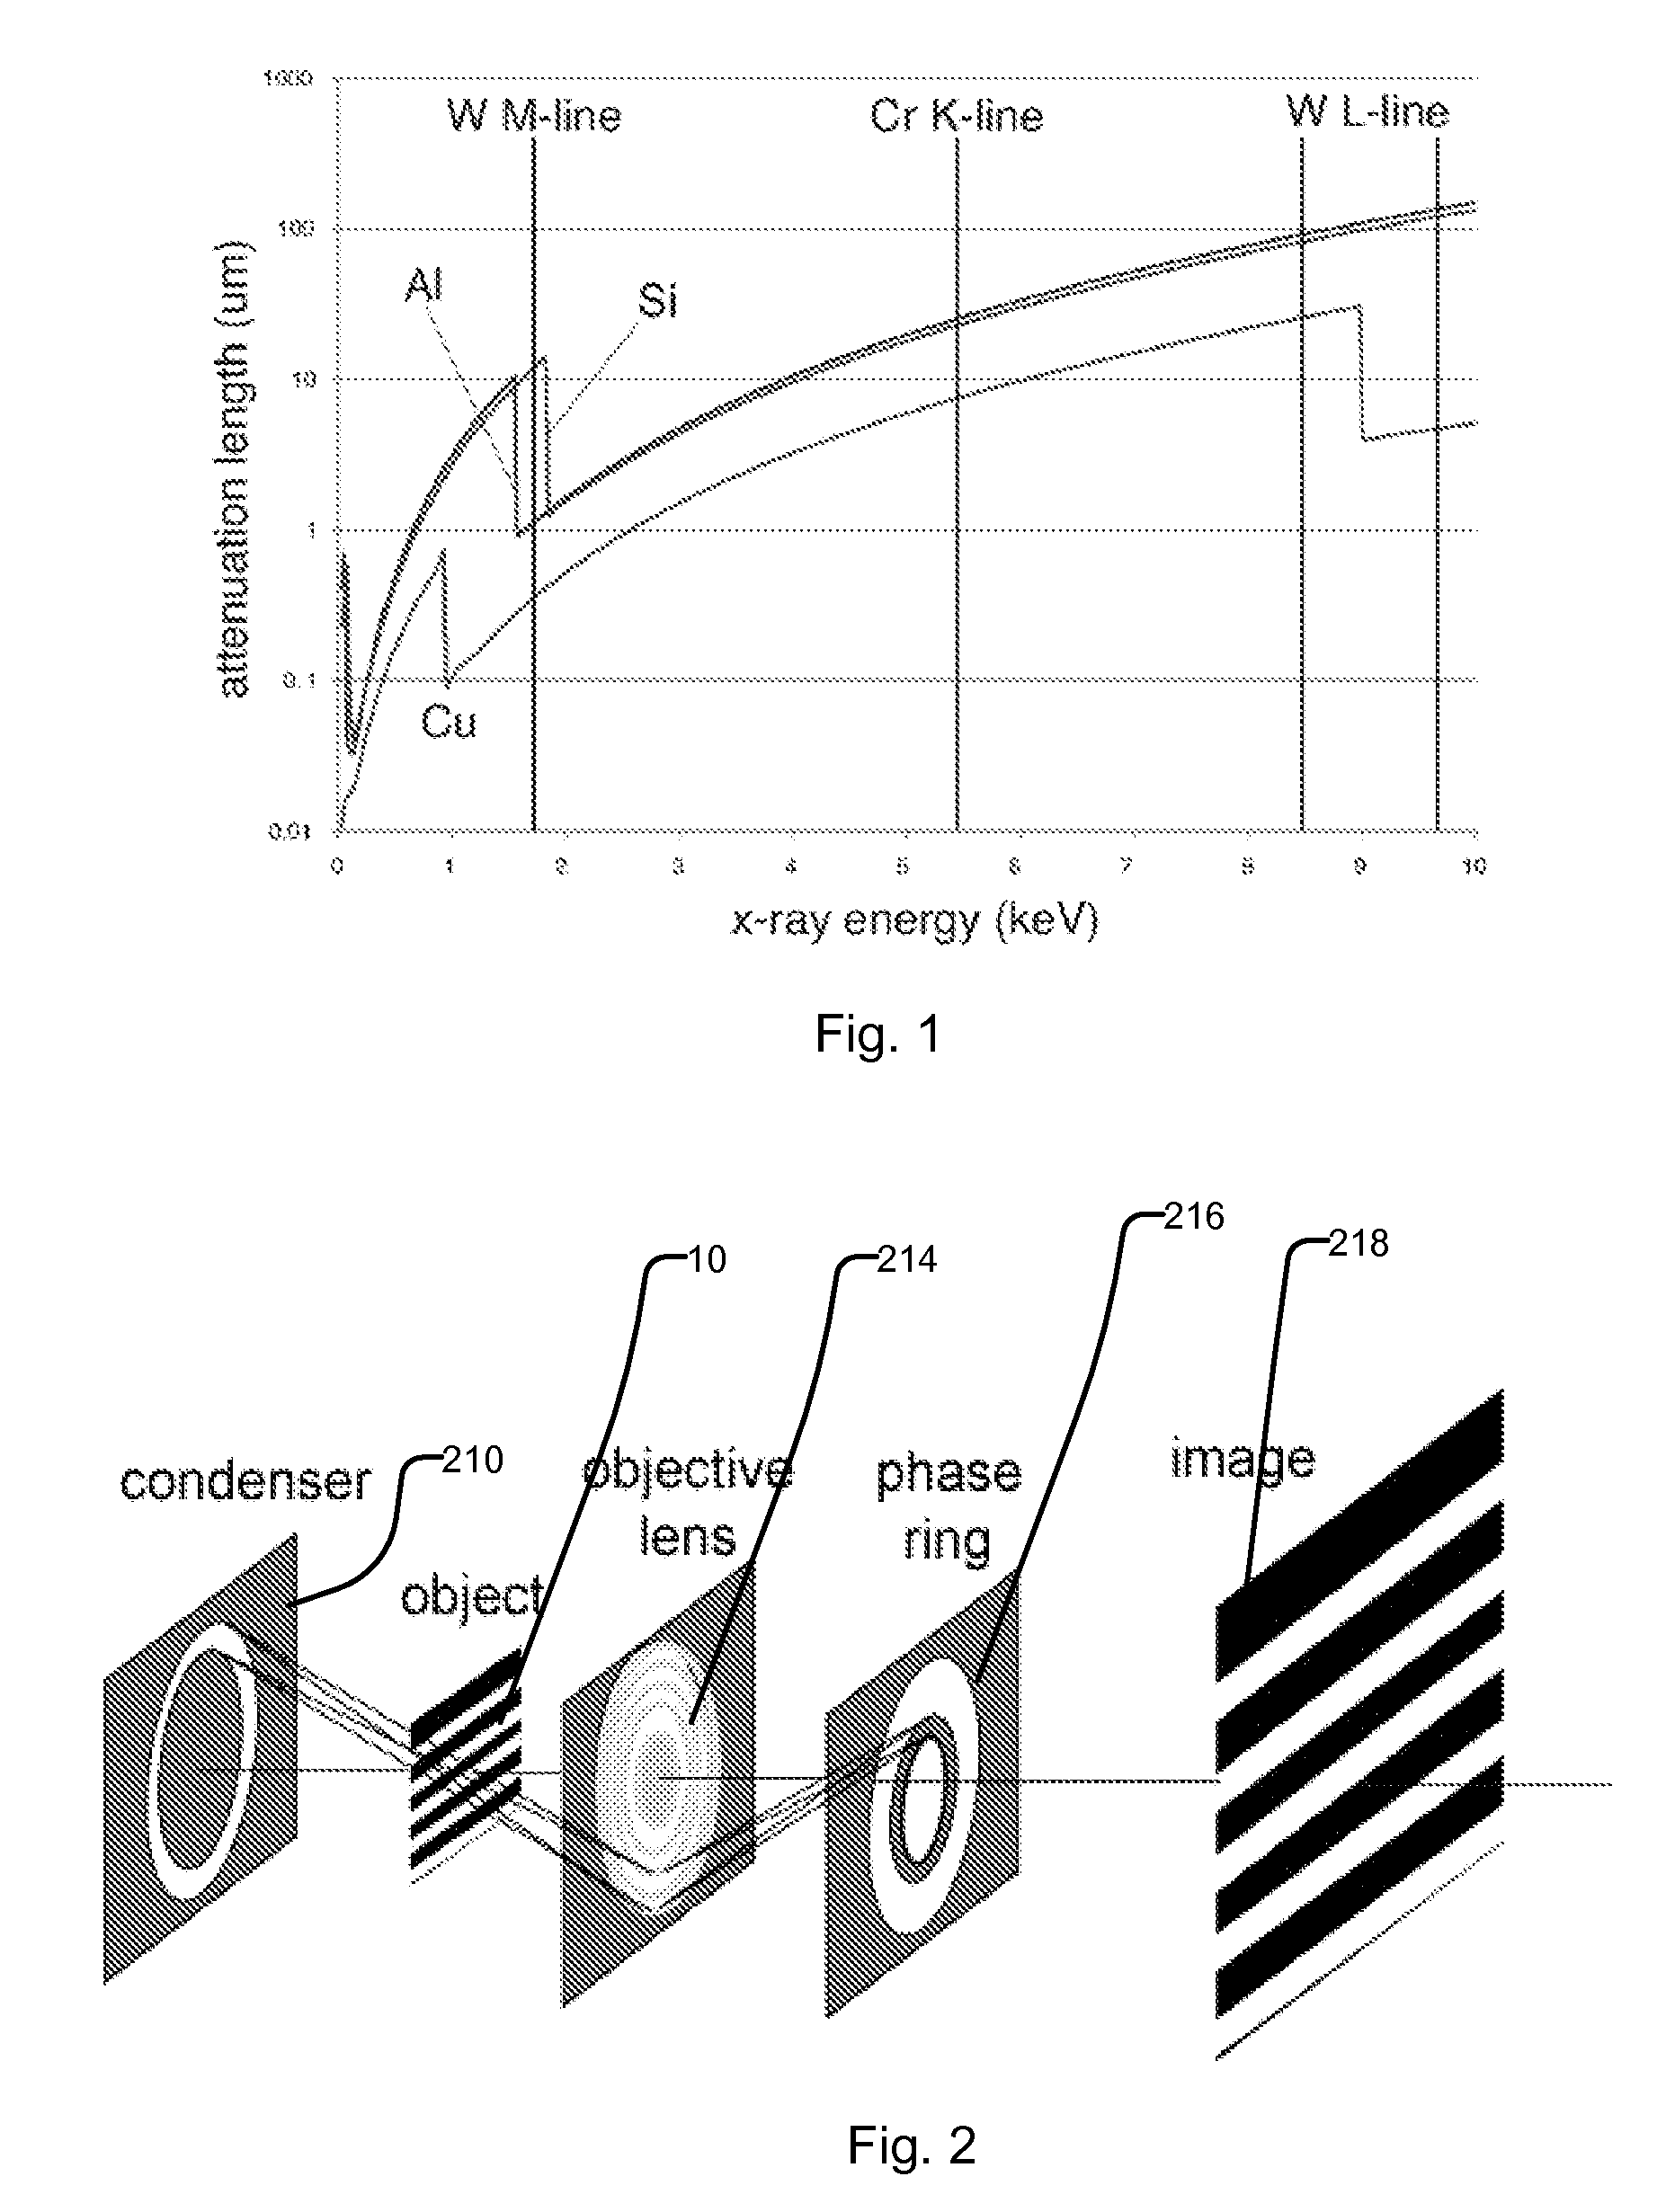 Optimized x-ray energy for high resolution imaging of integrated circuits structures